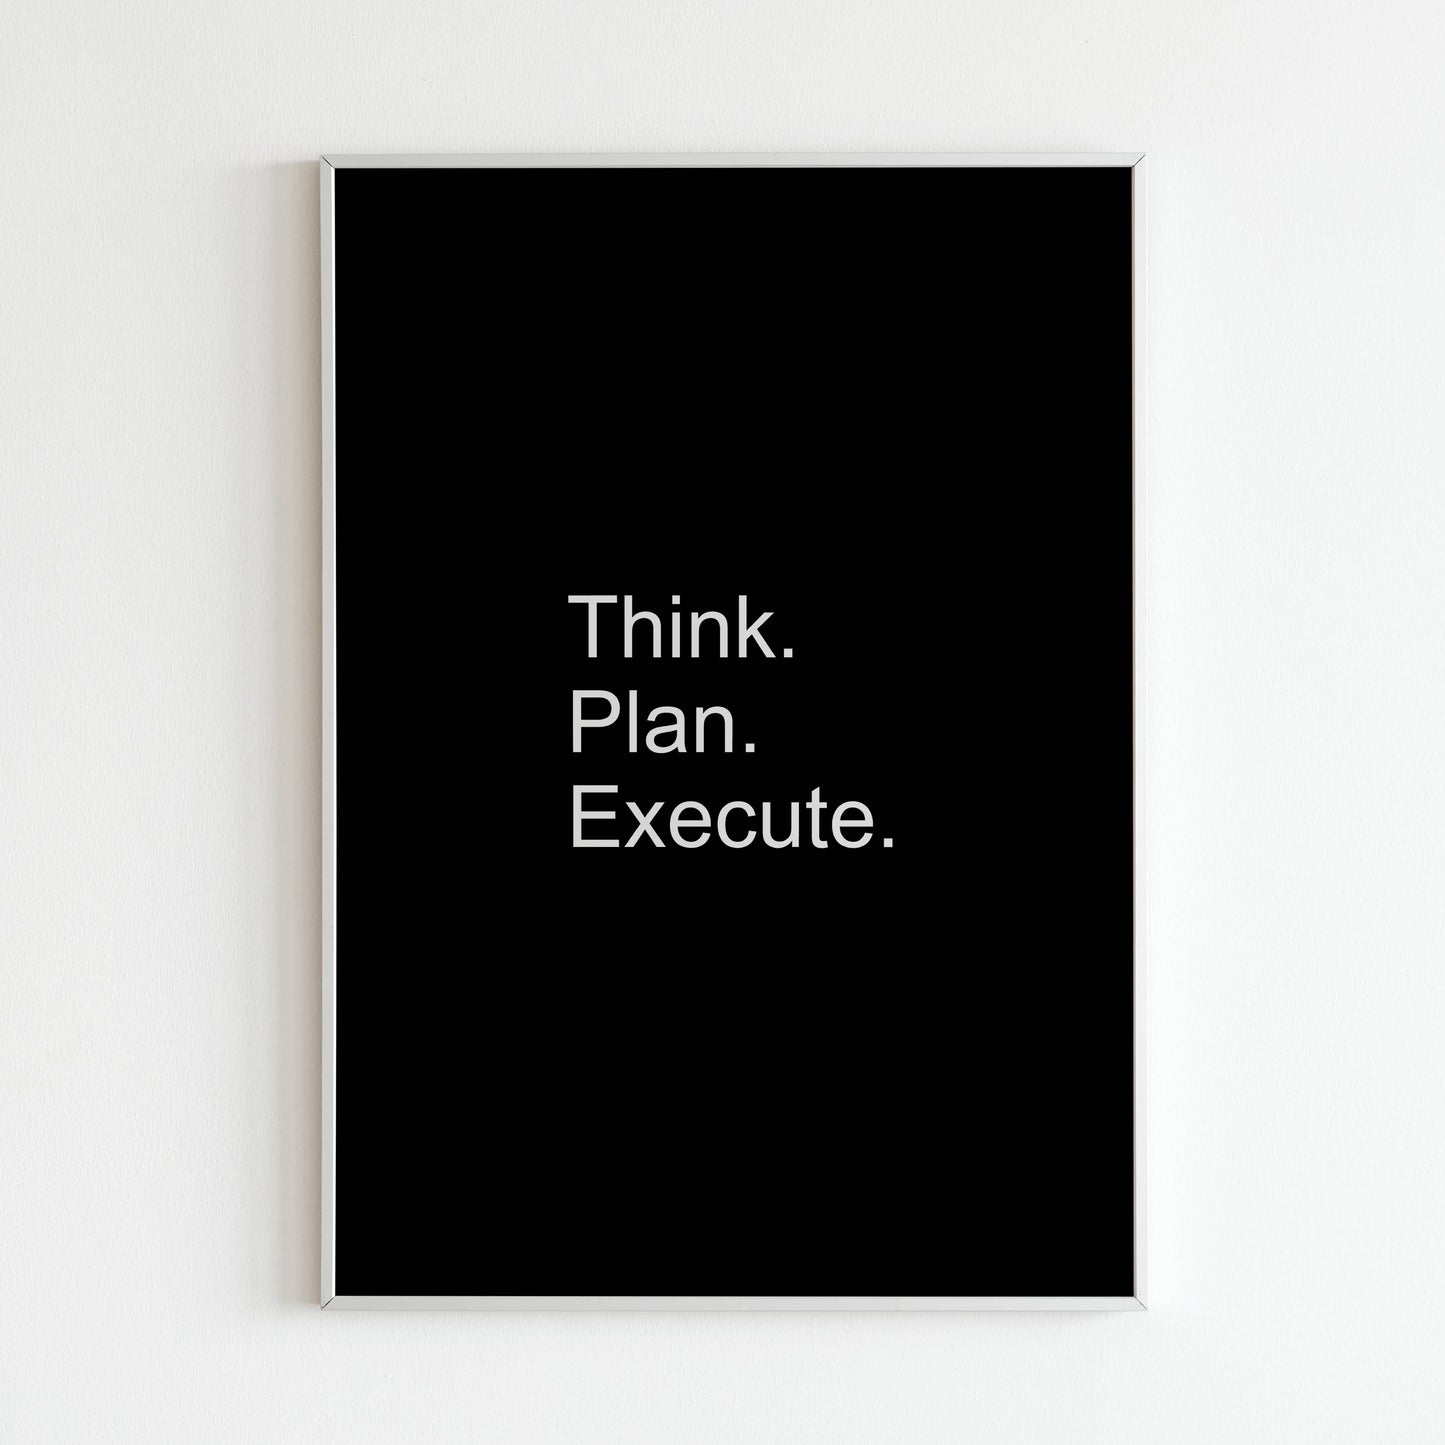 "Think. Plan. Execute." - Printed Wall Art / Poster. Motivate yourself with this strategic message. Arrives ready to hang.